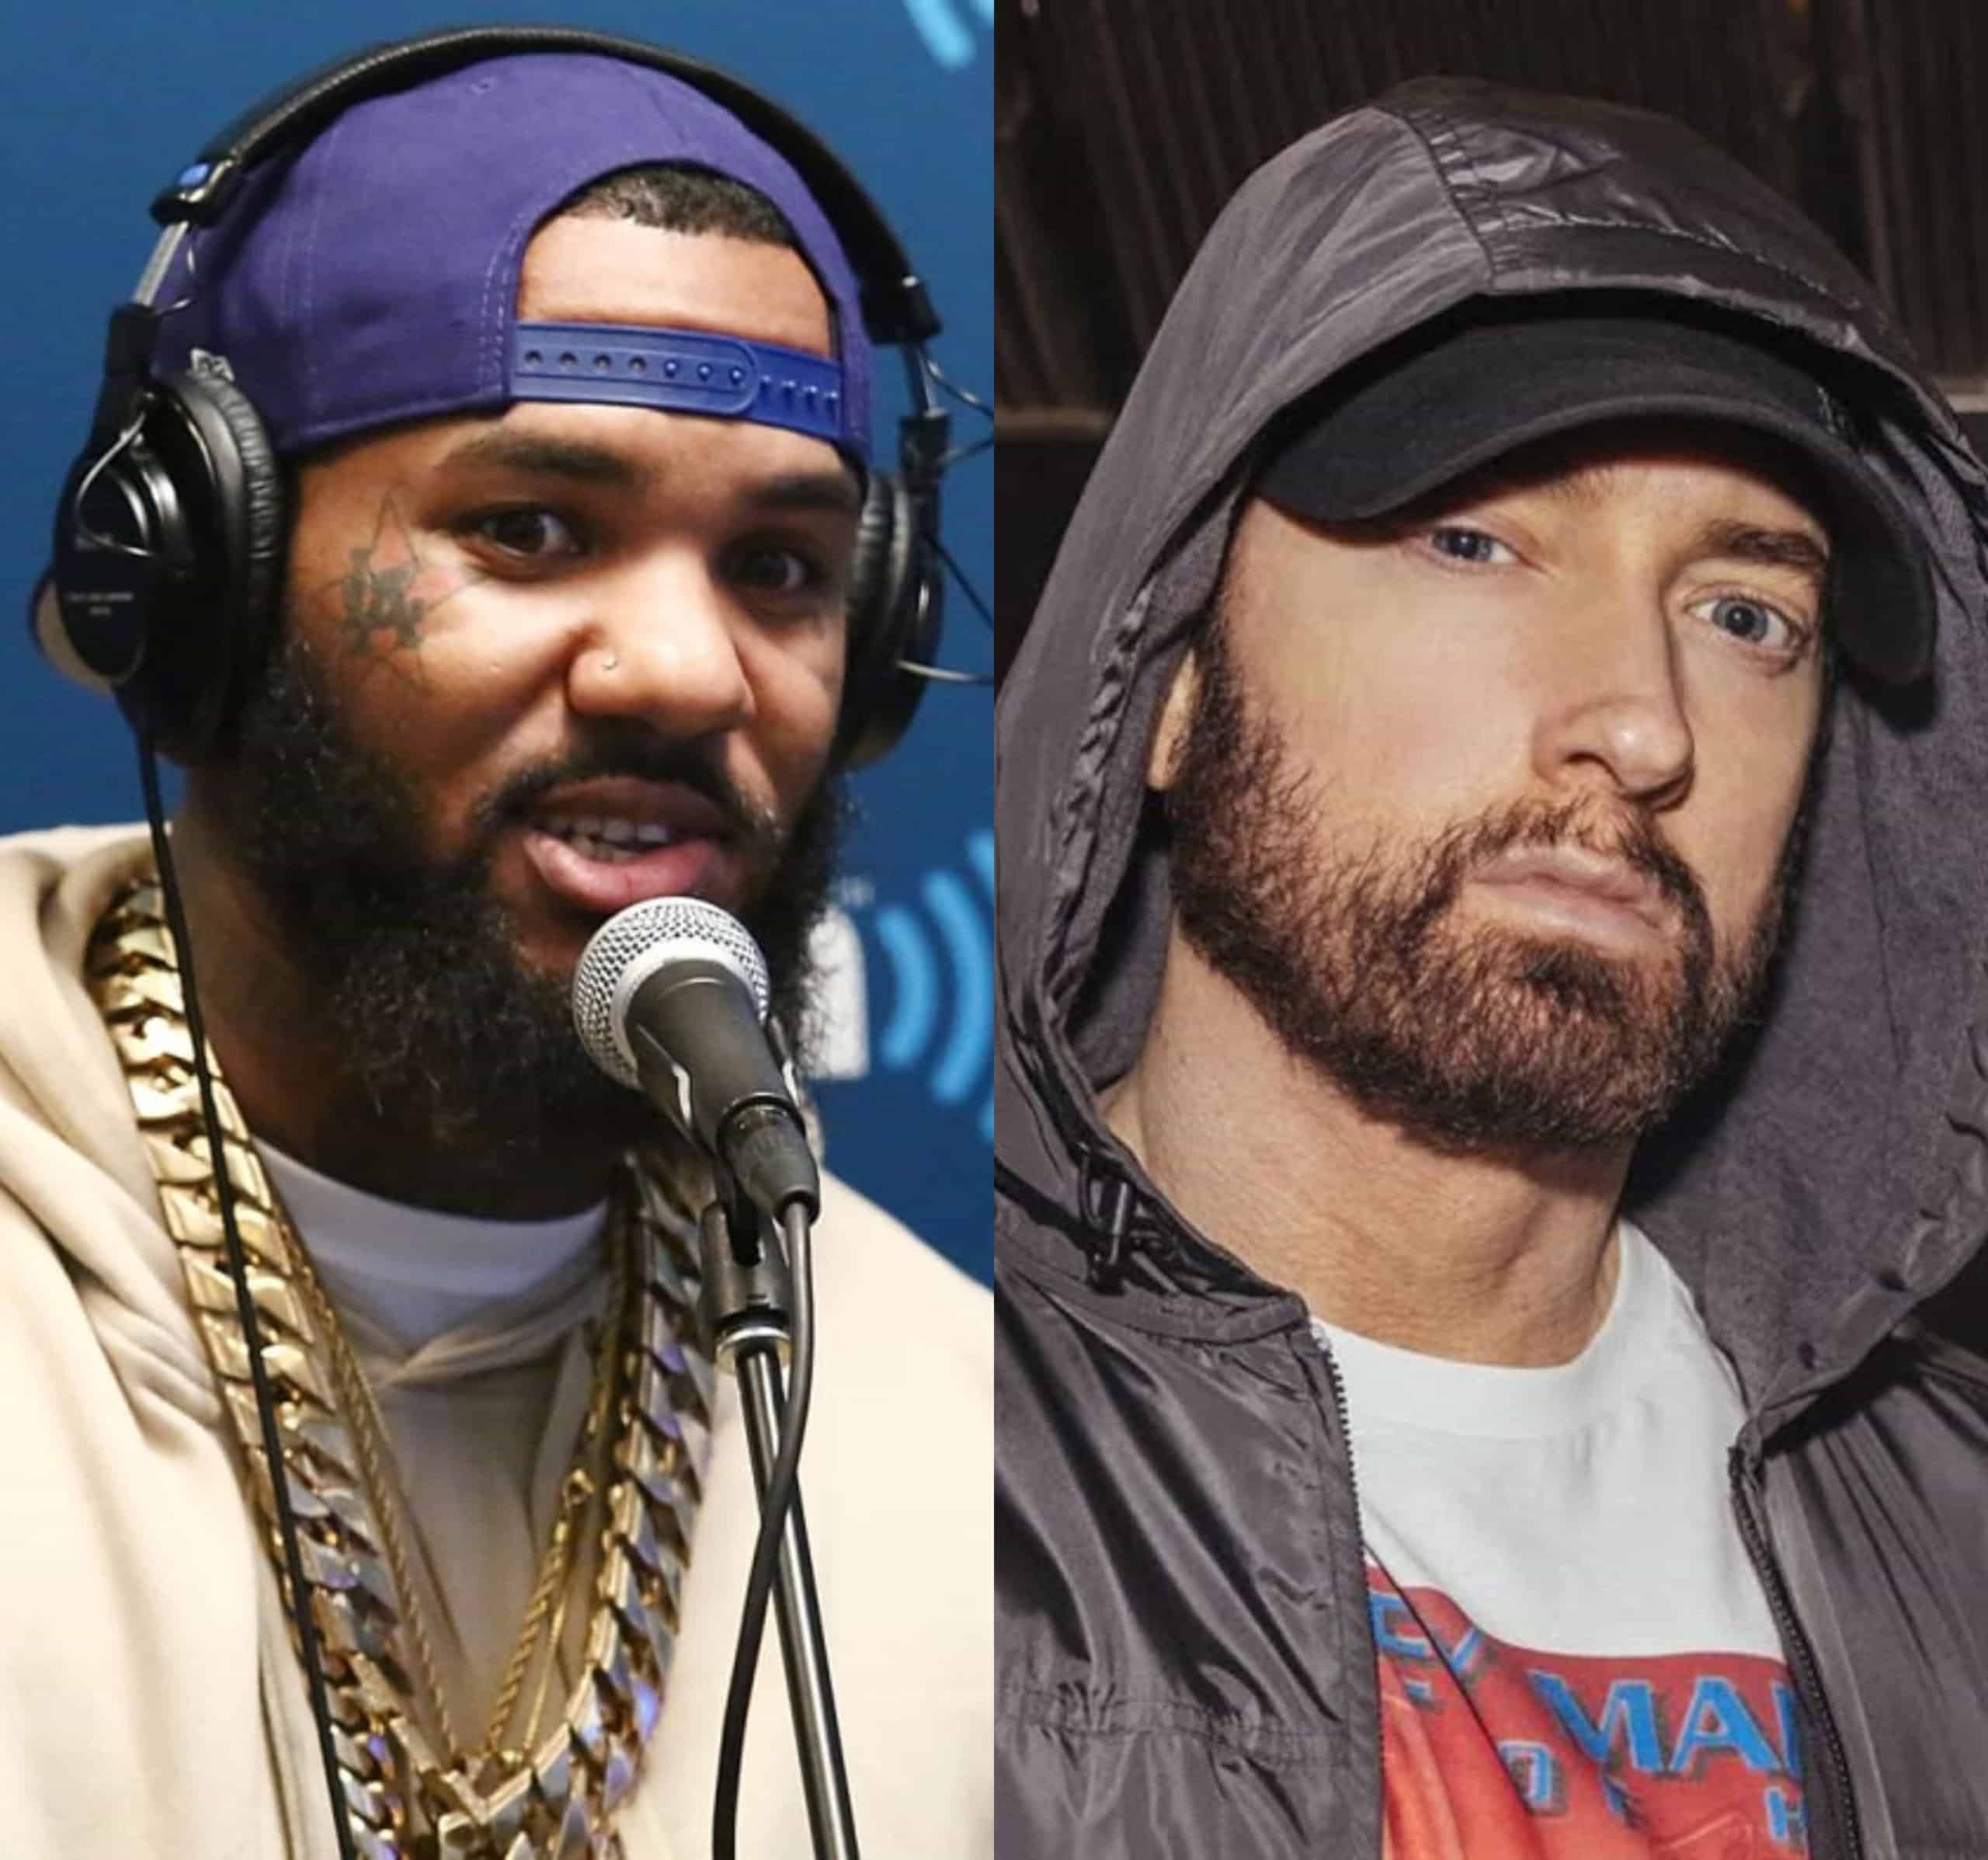 The Game Reacts To Eminem's Latest RIAA Achievement: "F**k How Many Records He Sold"